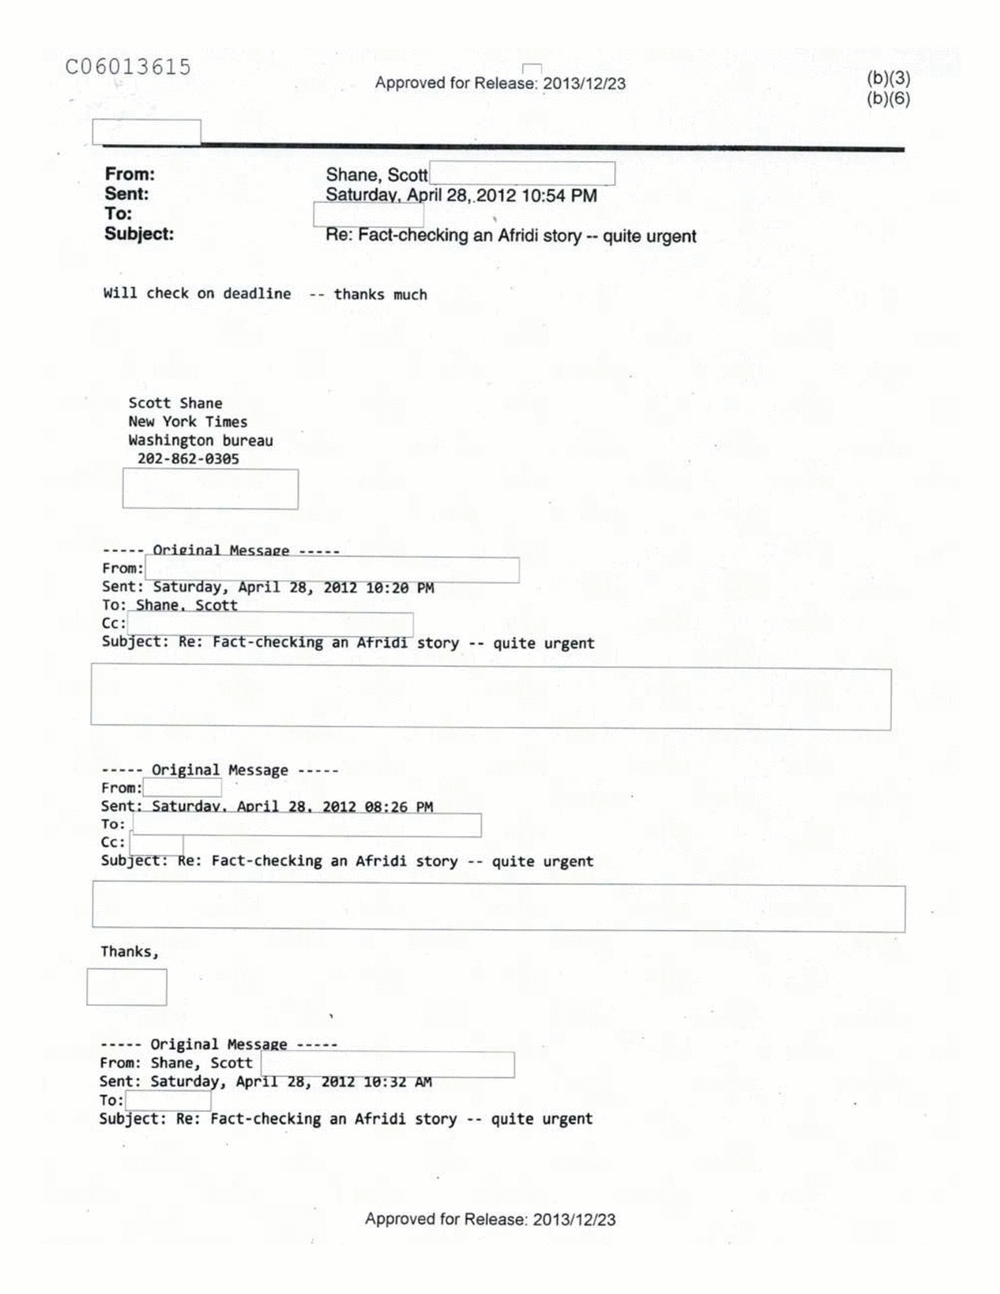 Page 437 from Email Correspondence Between Reporters and CIA Flacks